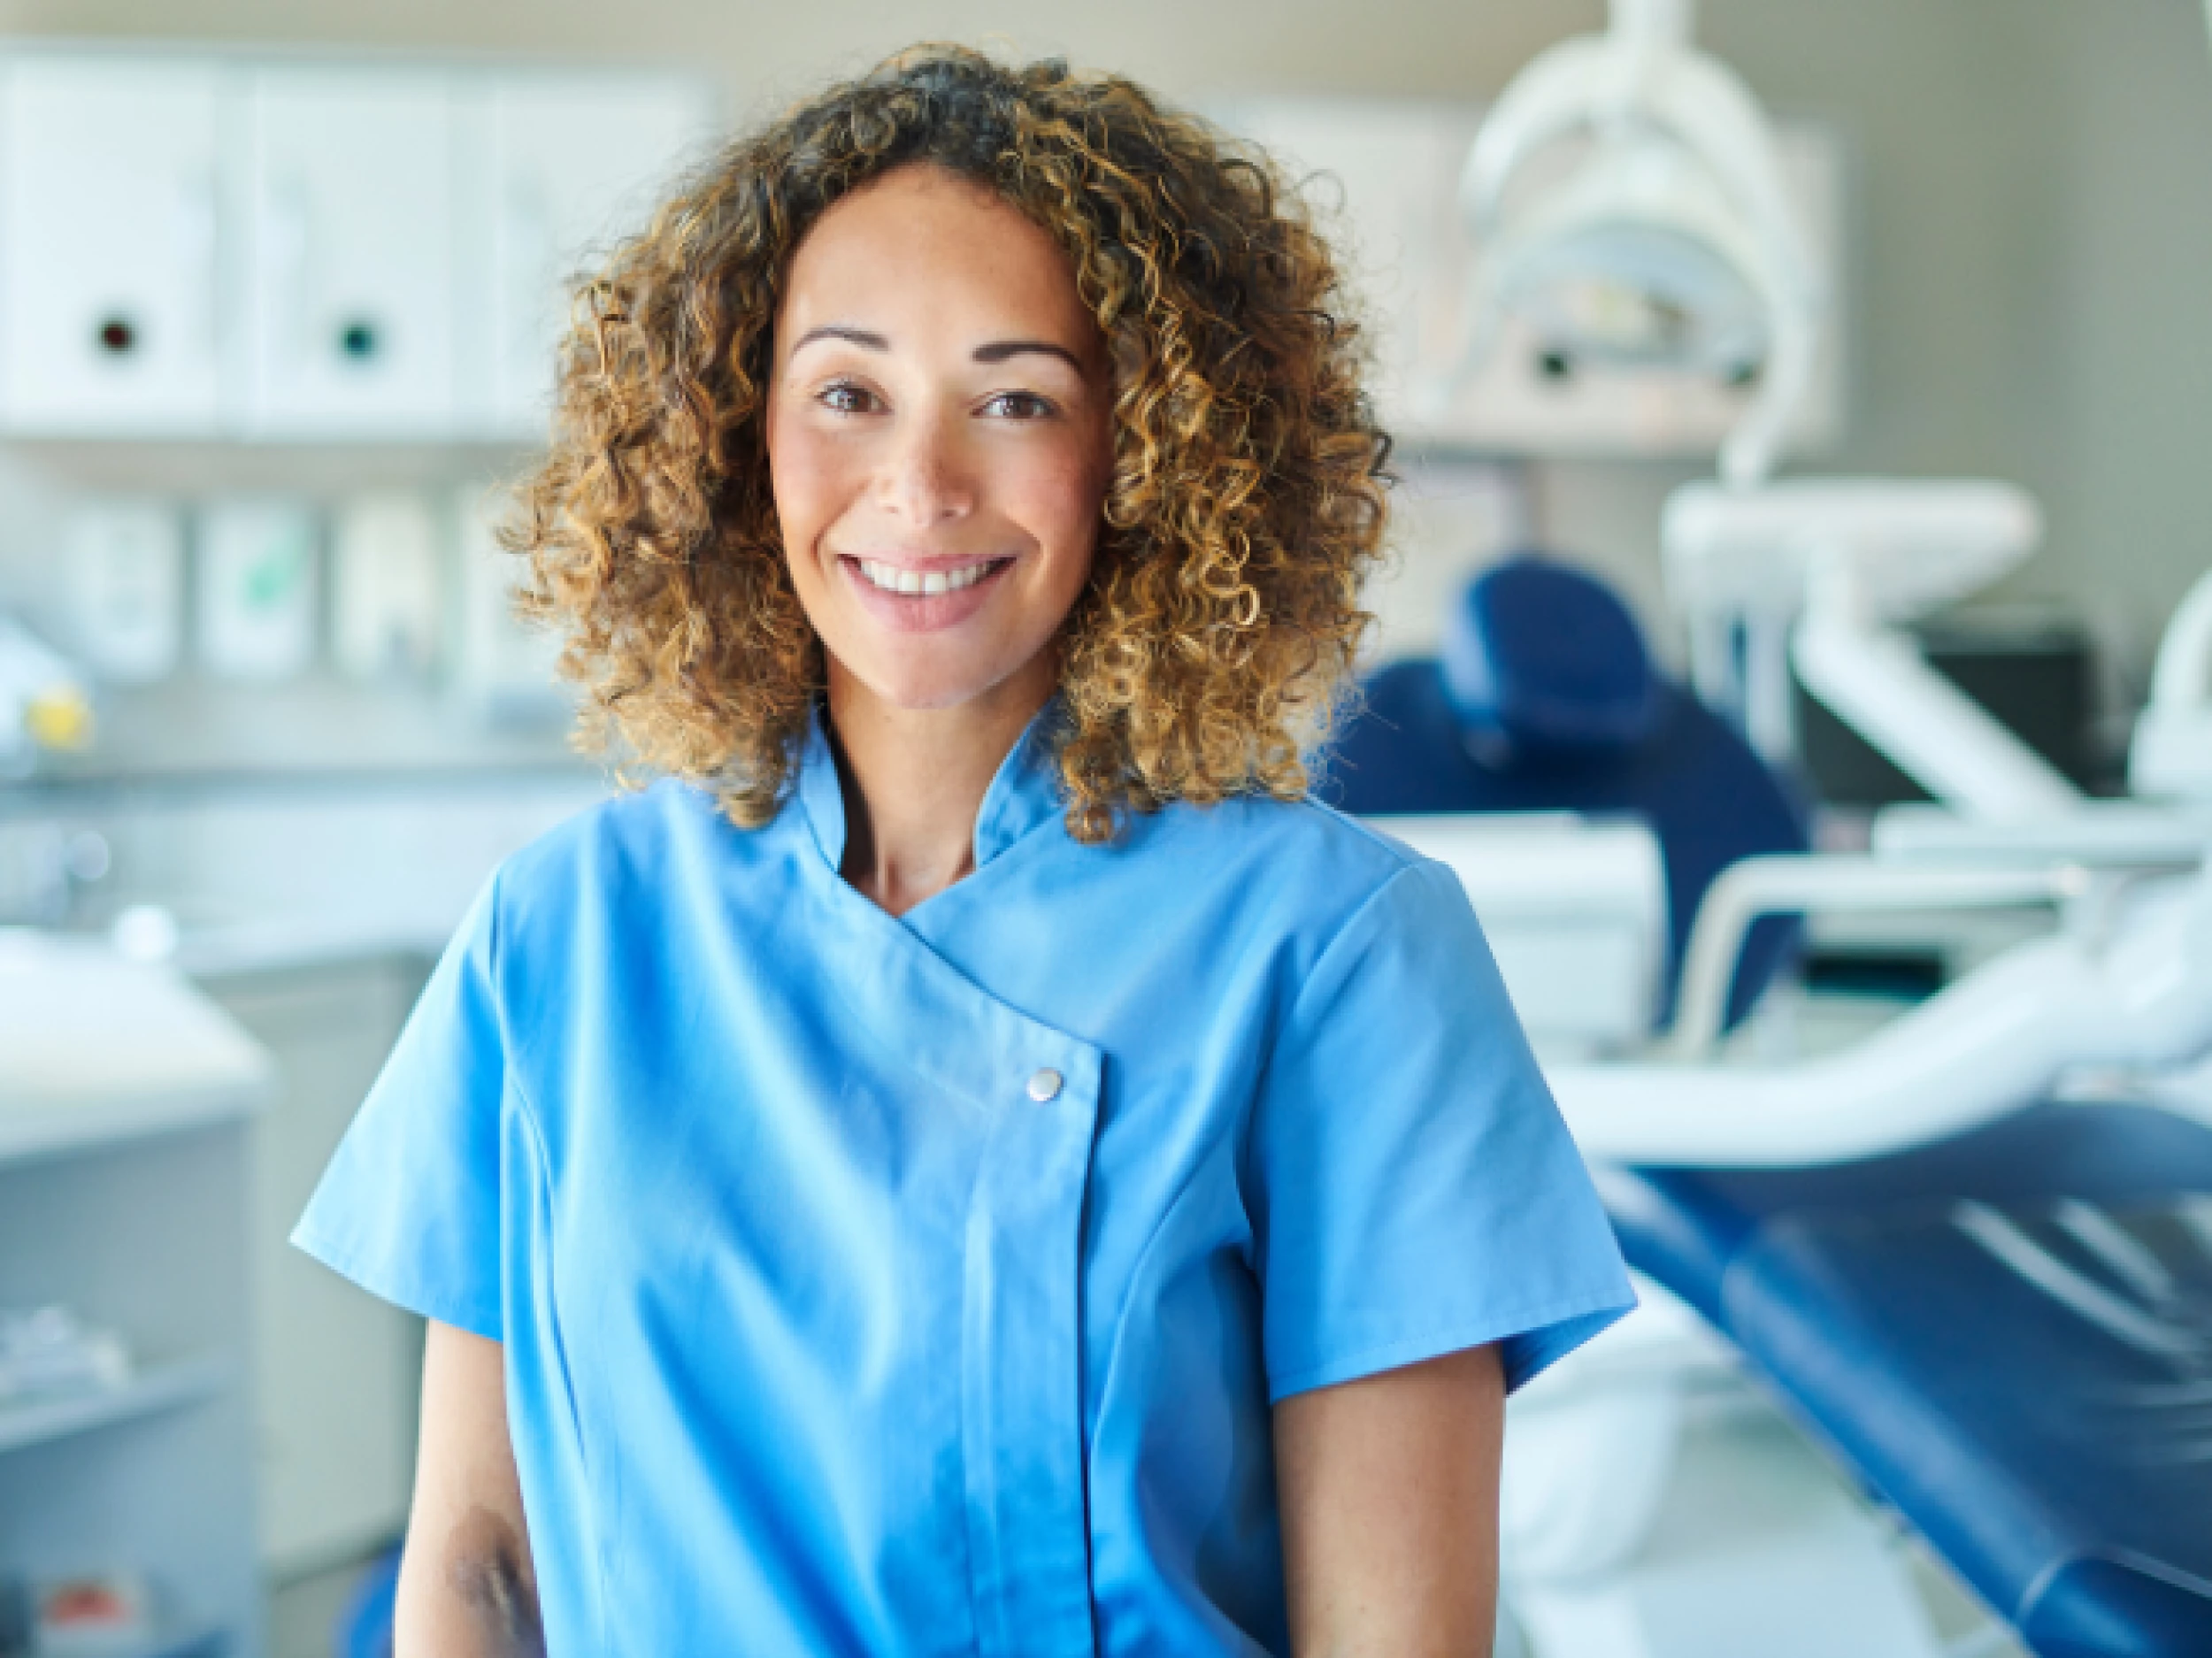 Oral Health Therapist professional (stock image)